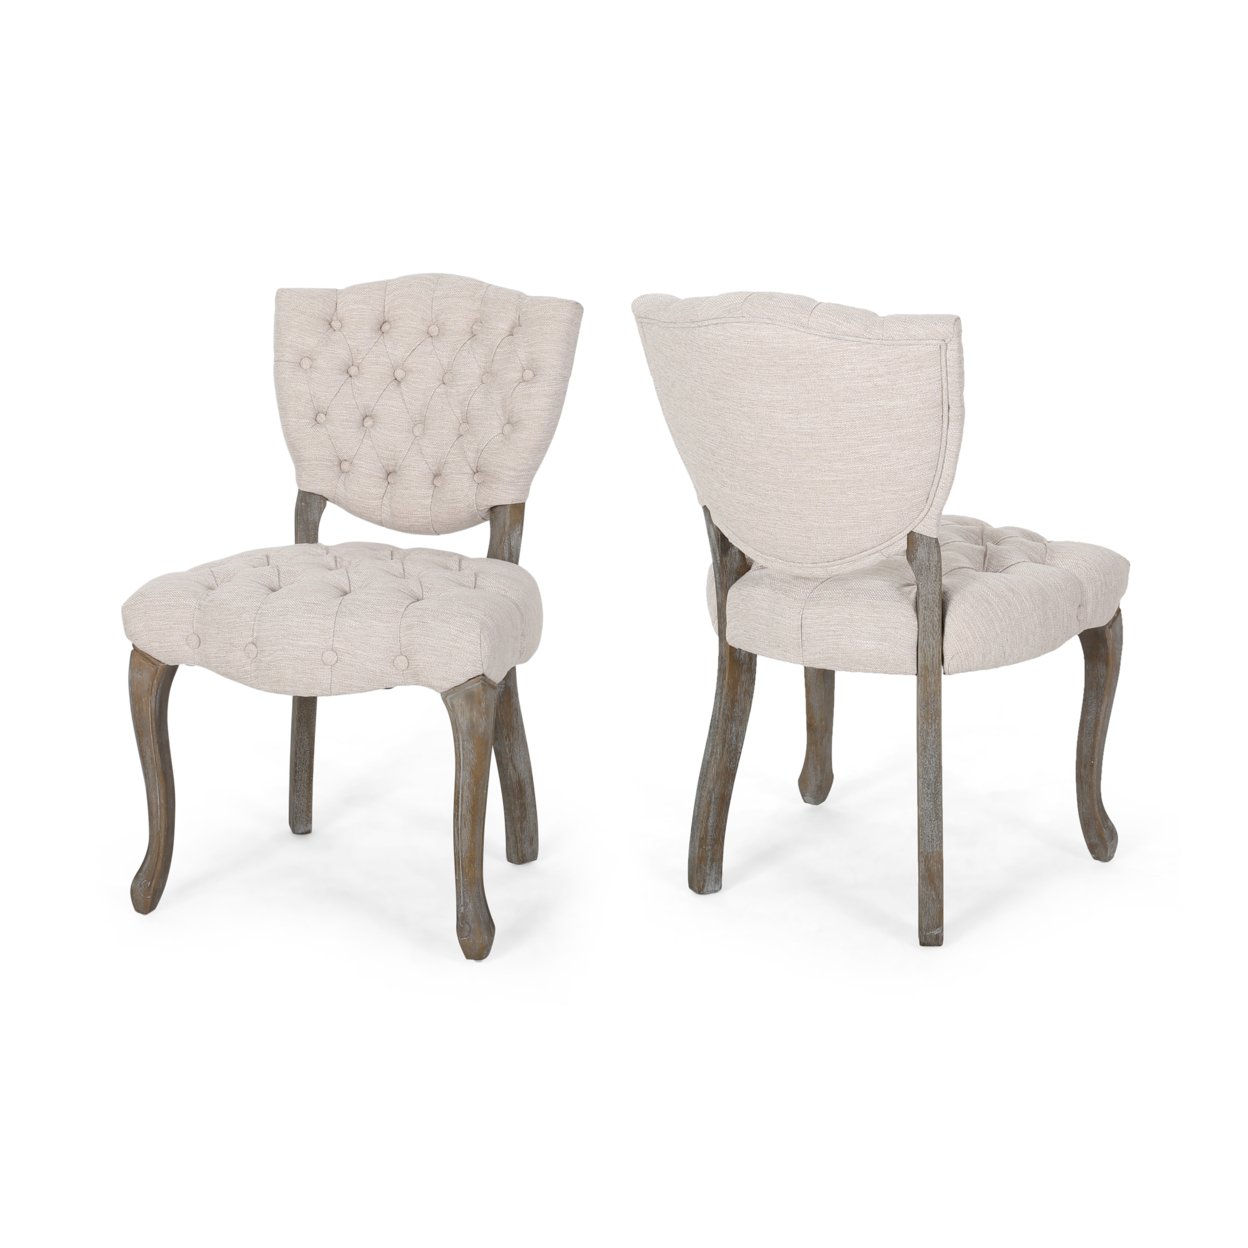 Case Tufted Dining Chair With Cabriole Legs (Set Of 2) - Light Blush + Brown Wash Finish